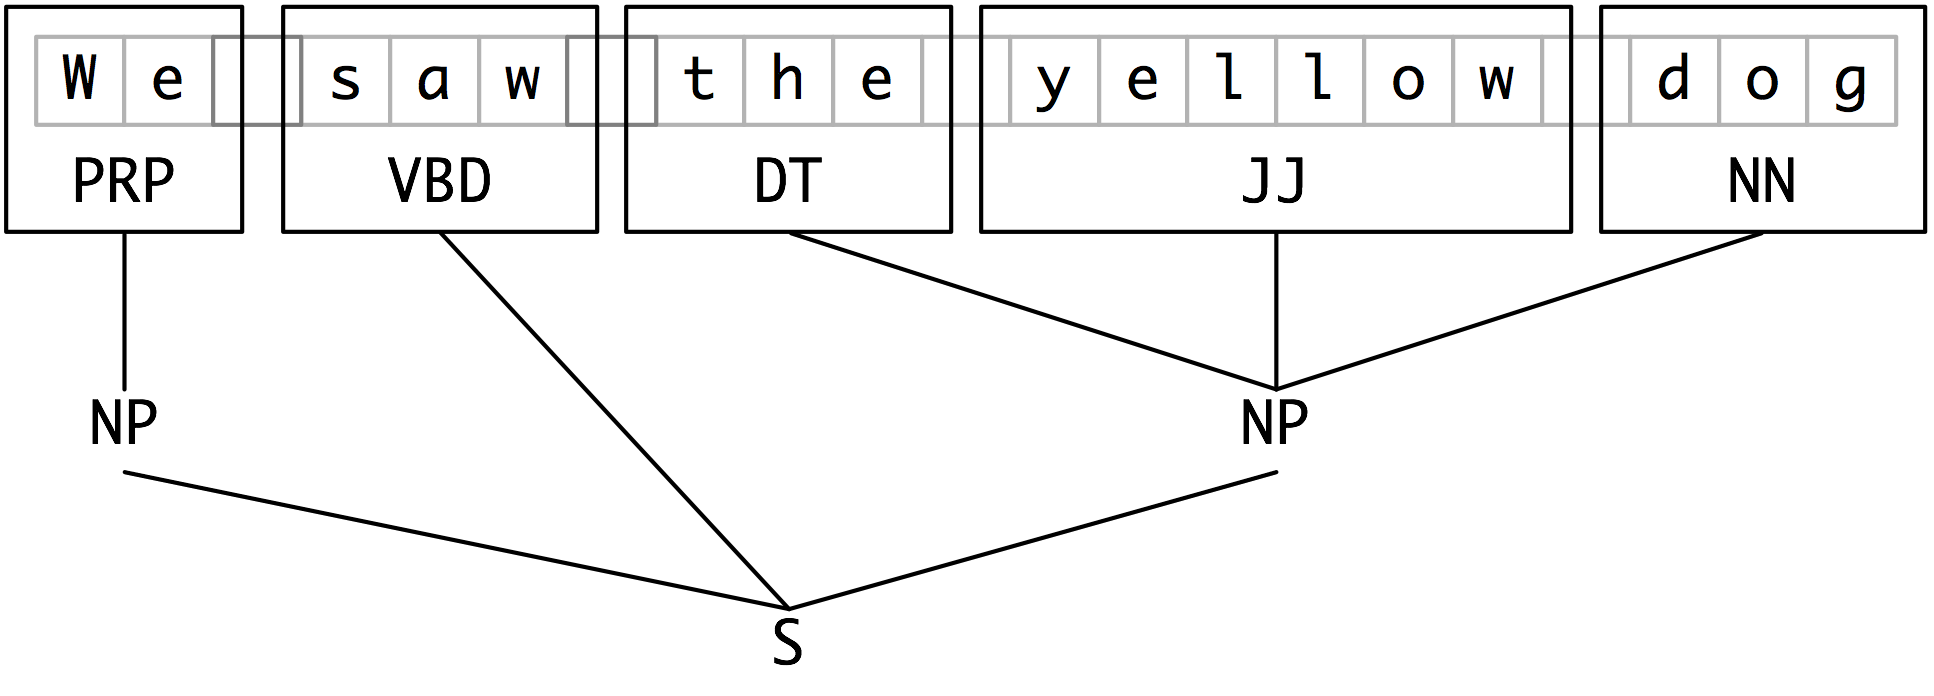 Tree Representation of Chunk Structures